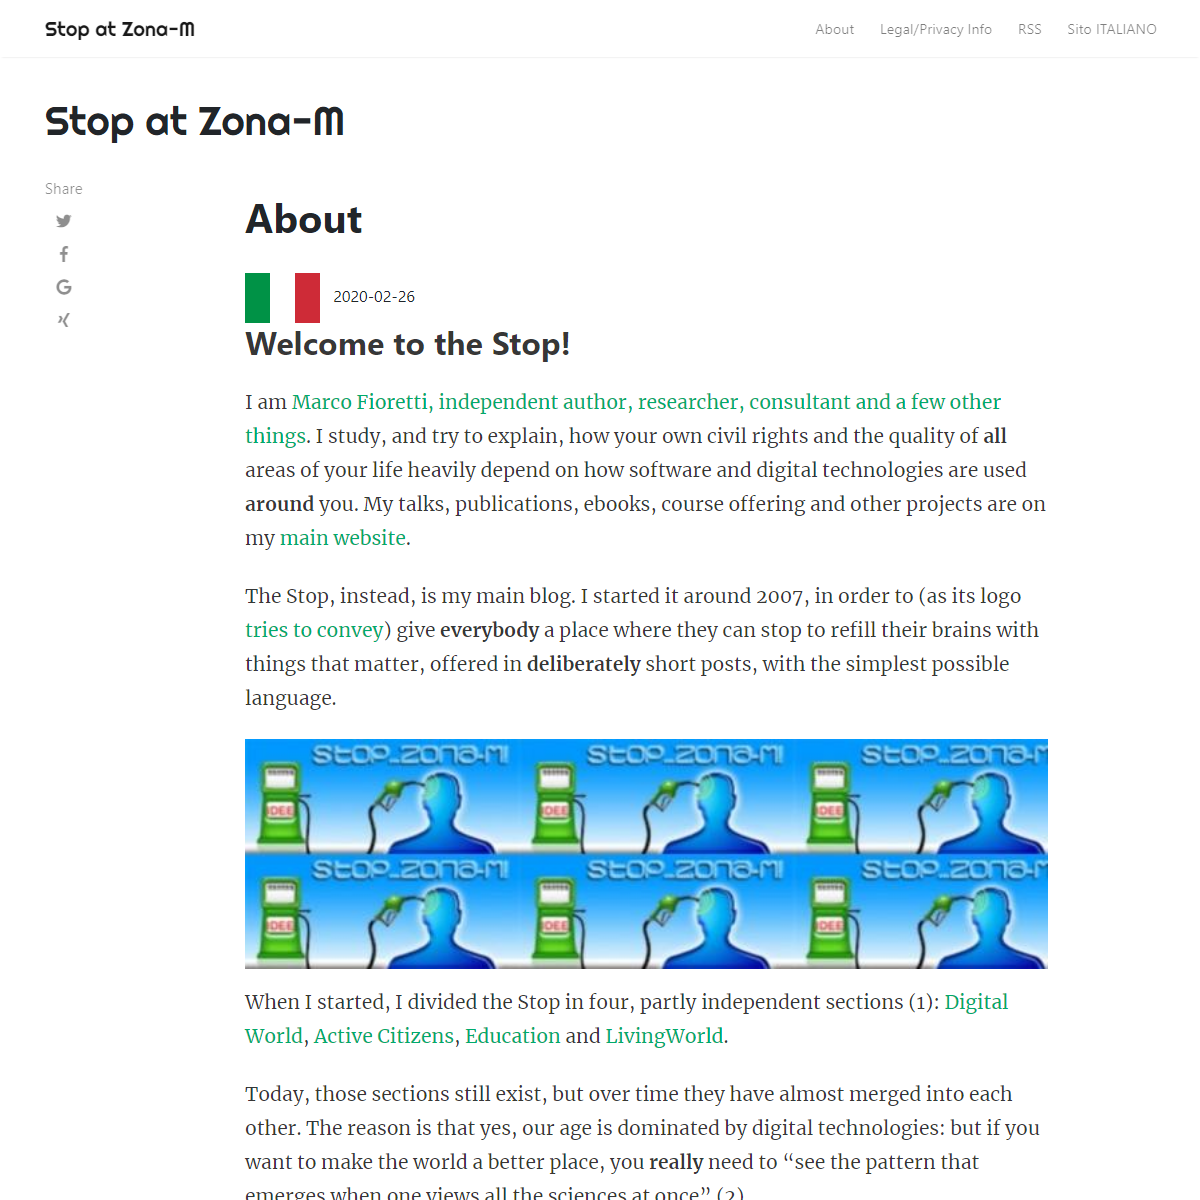 A complete backup of https://stop.zona-m.net/about/